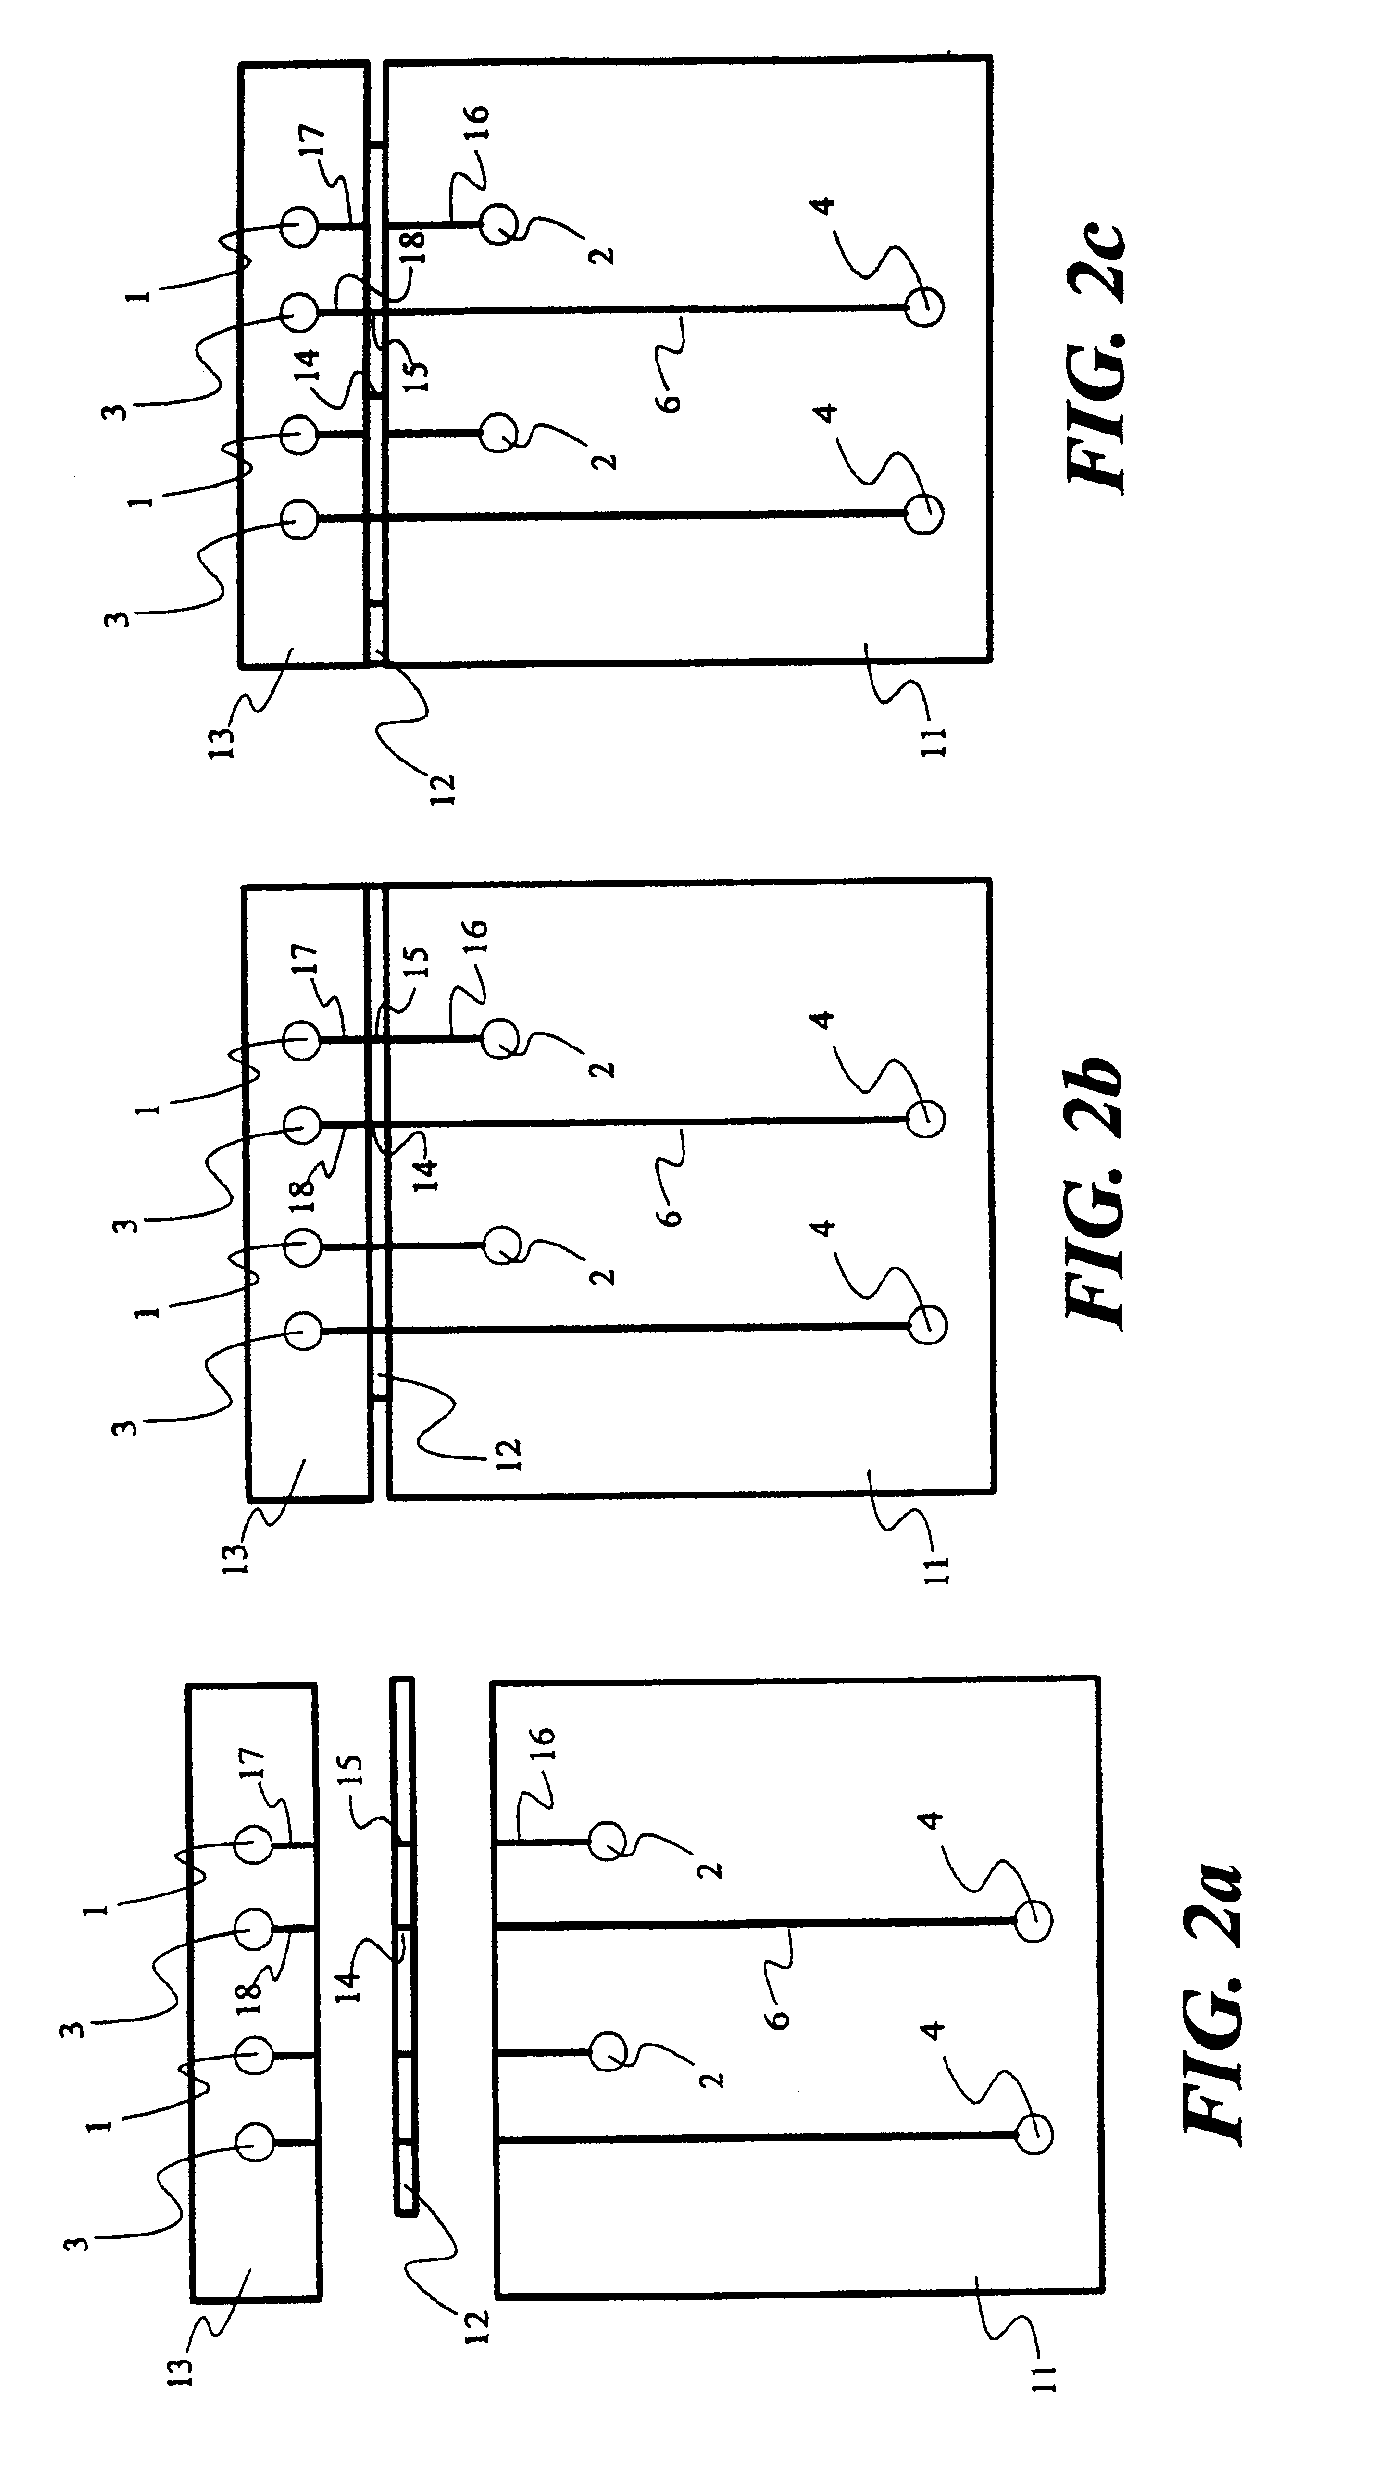 Method and apparatus for reproducible sample injection on microfabricated devices